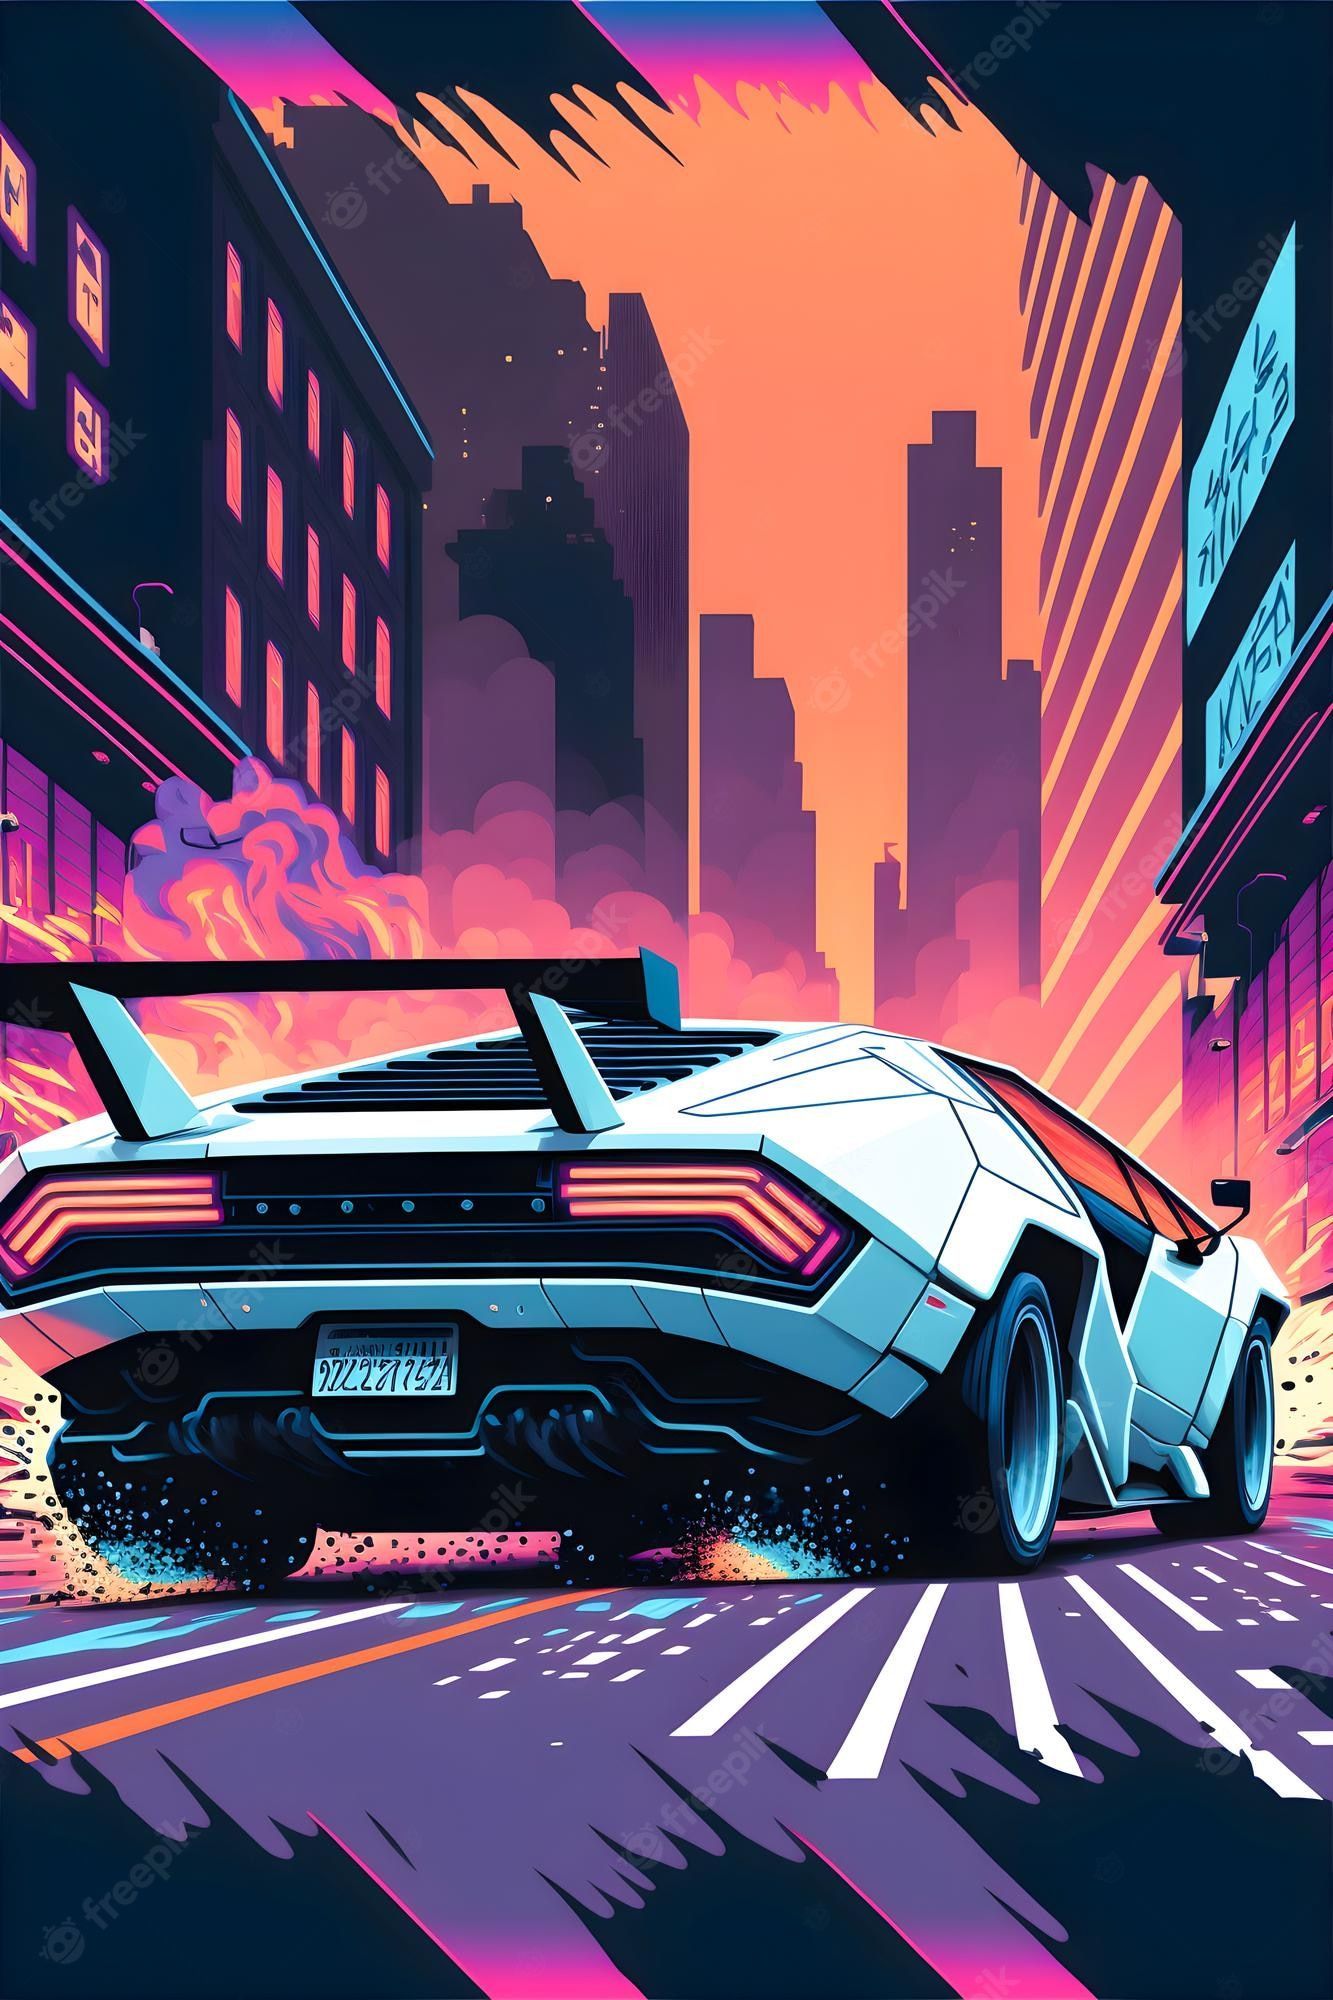 Premium Photo. Cars and city background hand drawn future style illustartion synthwave and retro style